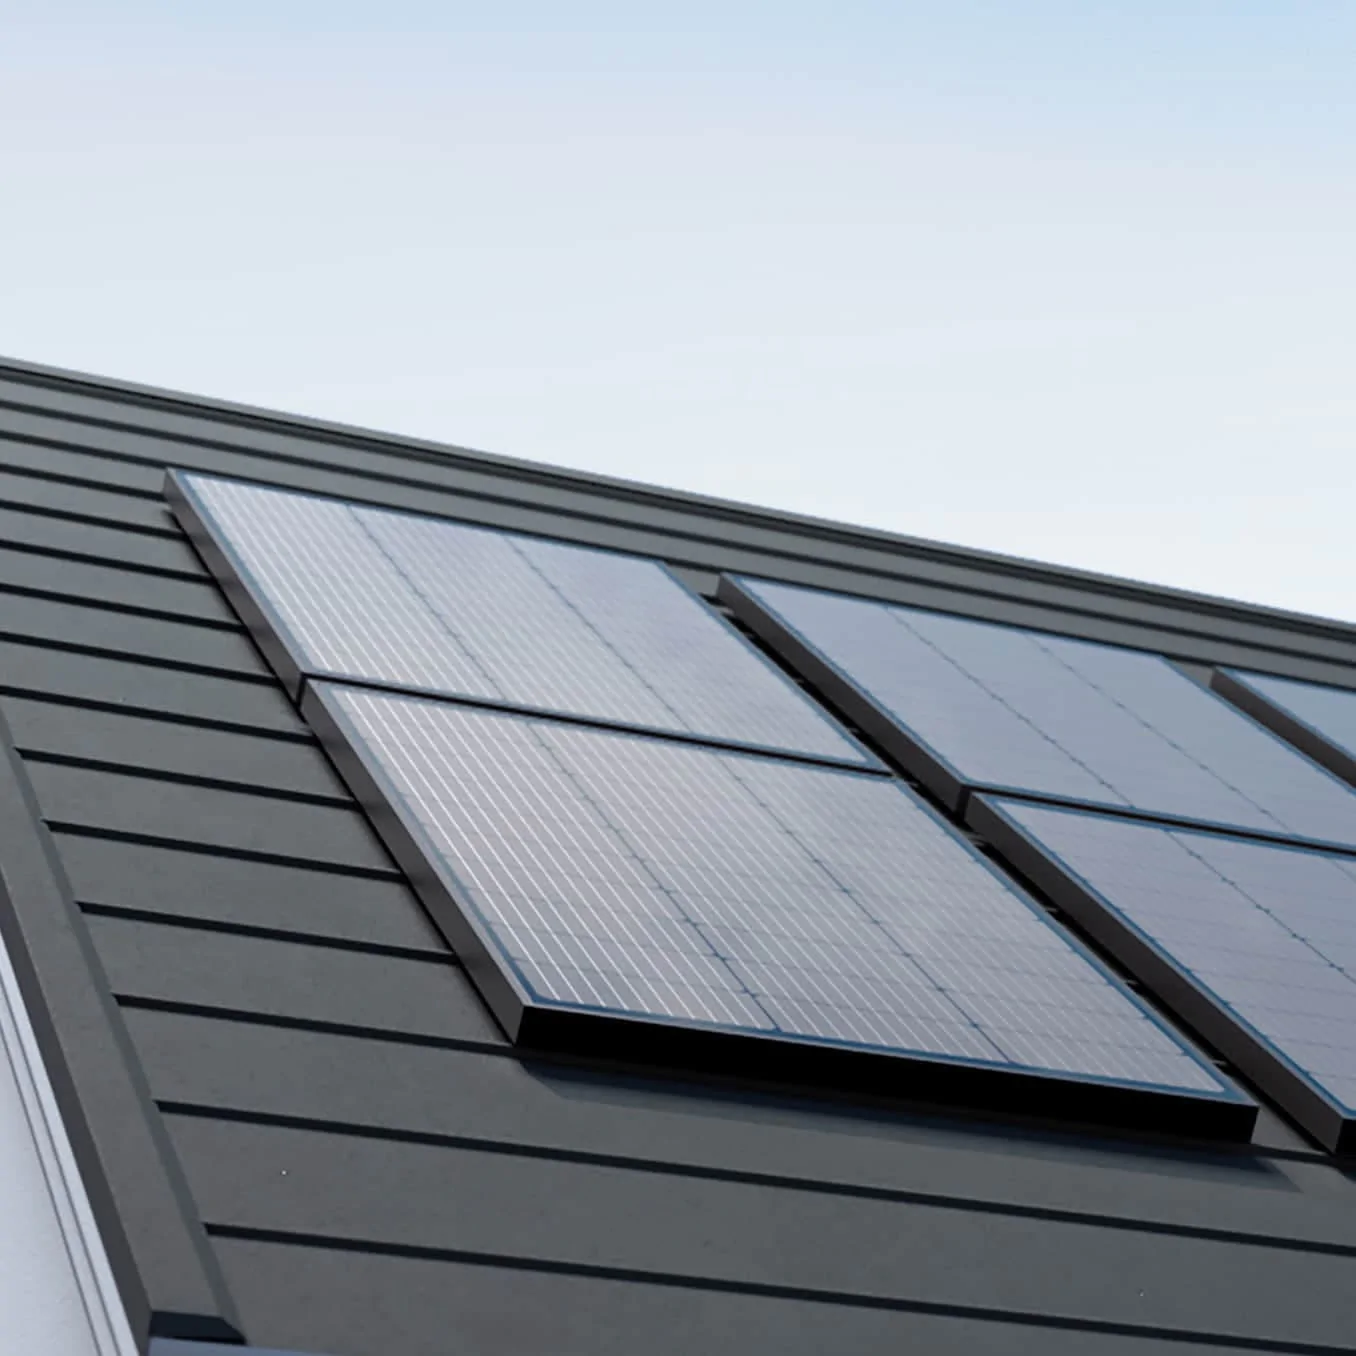 Solar panels on the roof of a house utilizing EcoFlow 100W Rigid Solar Panel technology.